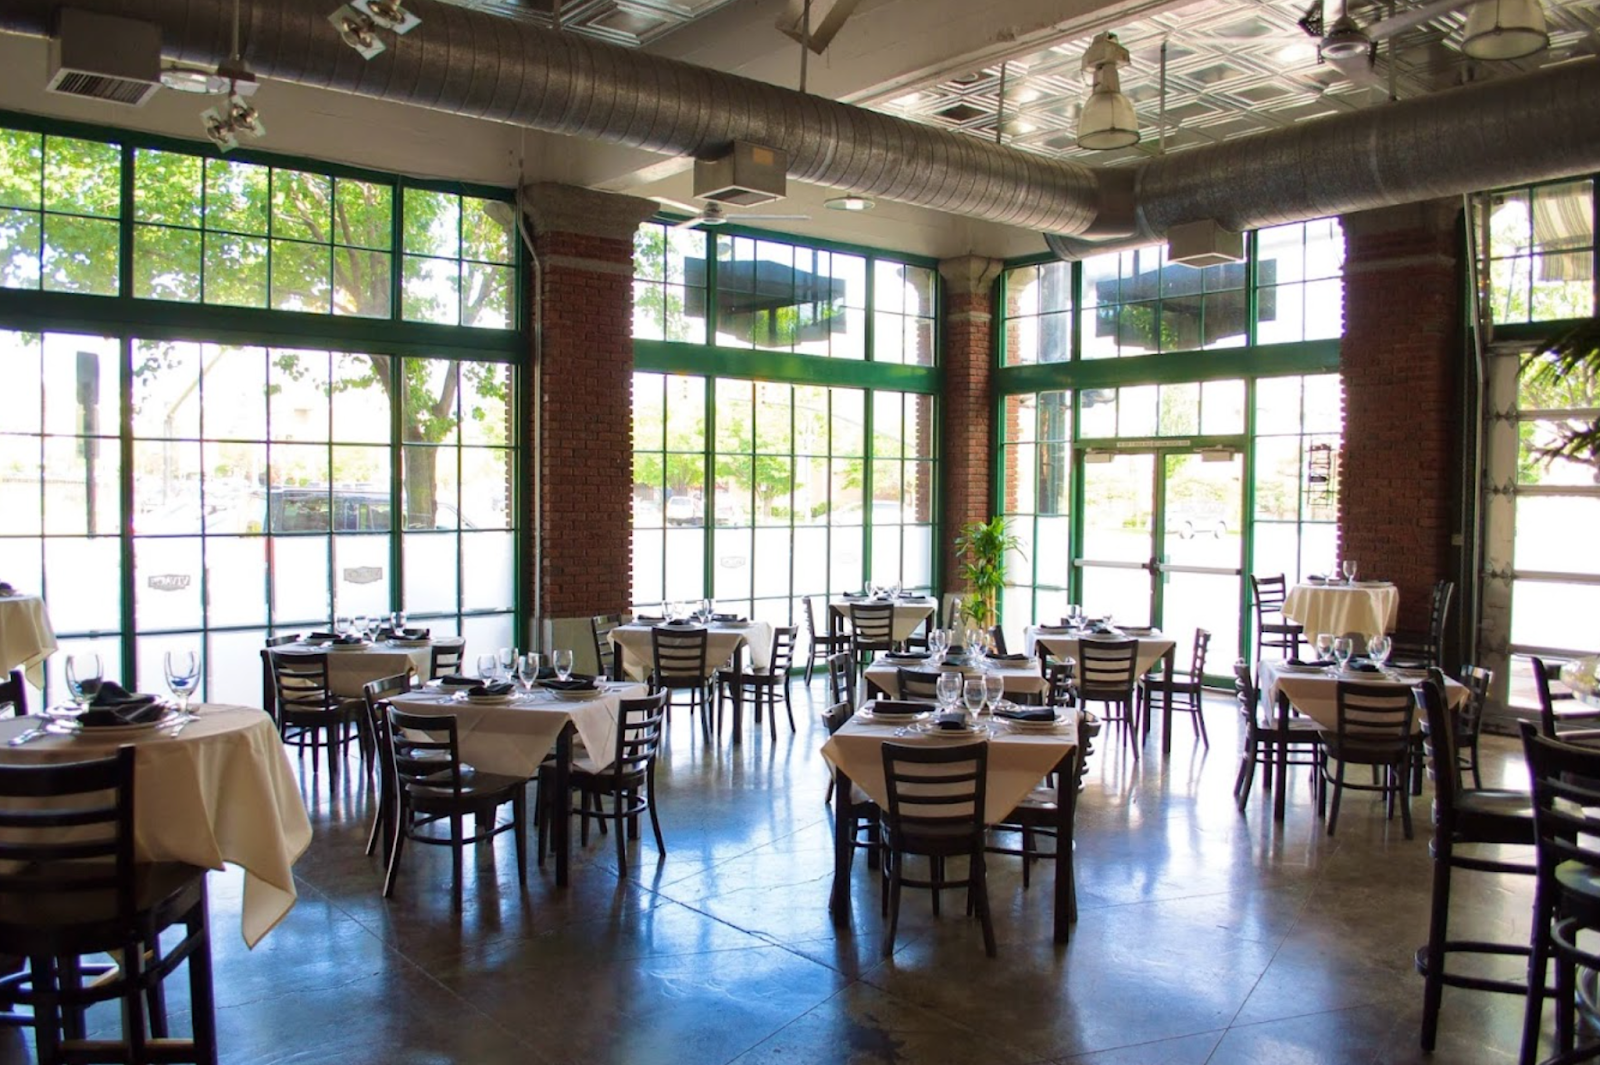 Interior dining room surrounded by floor to ceiling green windows of Cucina Toscana in SLC.